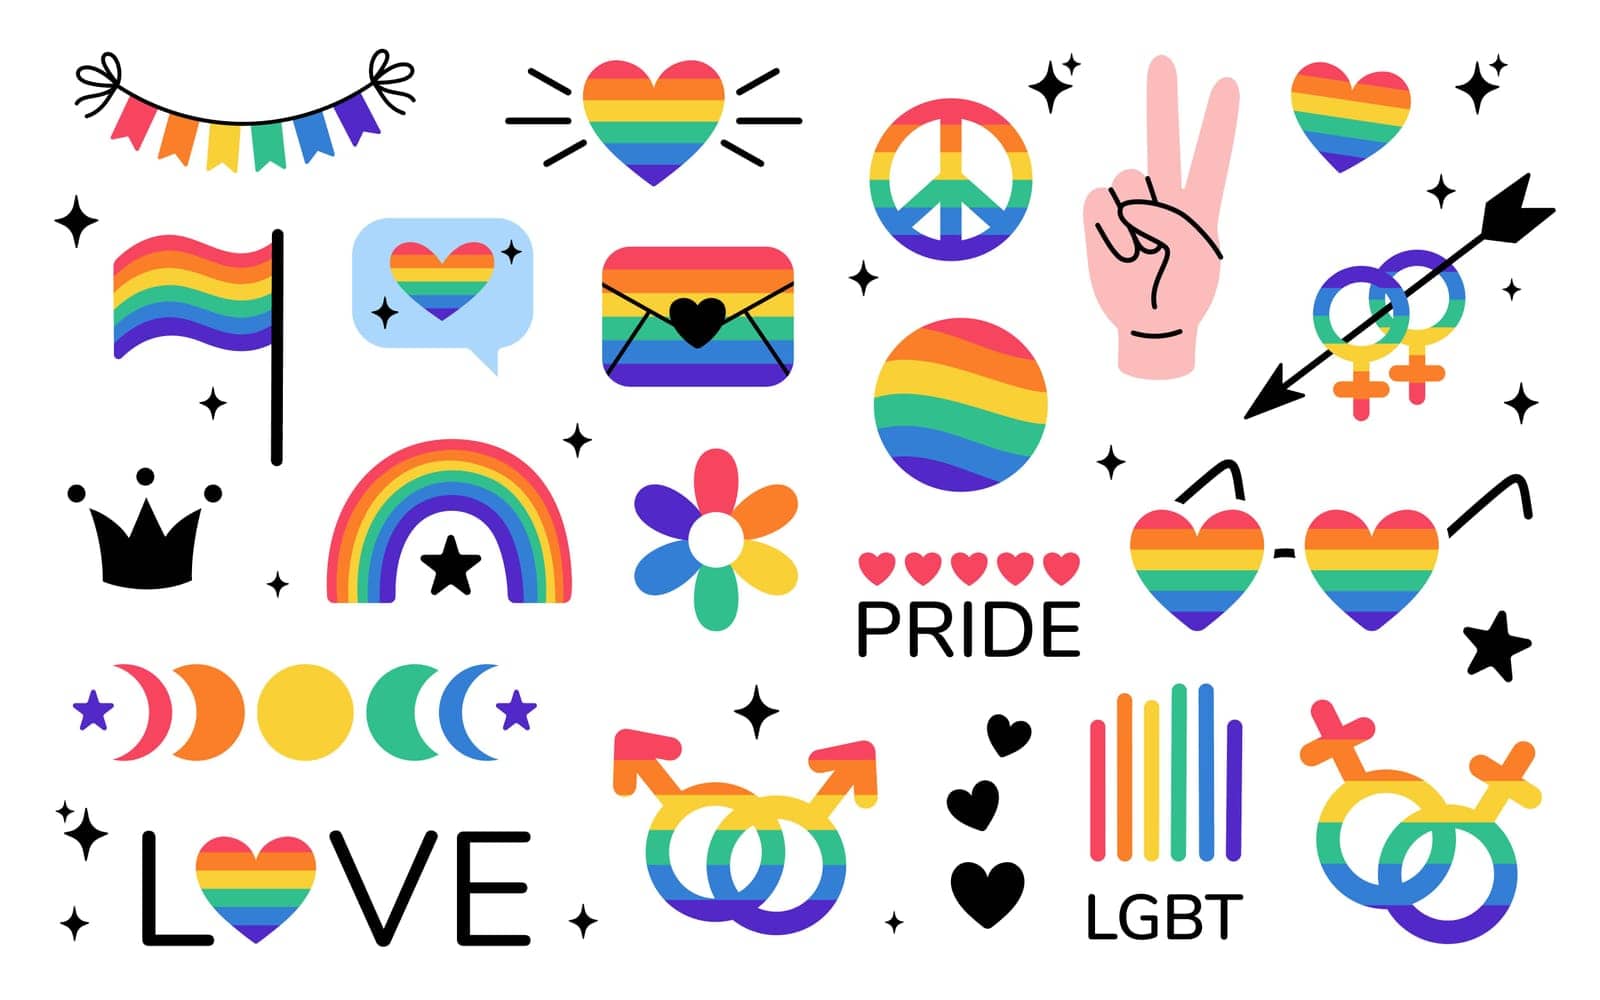 LGBT stickers pack in doodle style. LGBTQ set. LGBT pride community Symbols. Rainbow colored elements. Vector illustration isolated on white background.